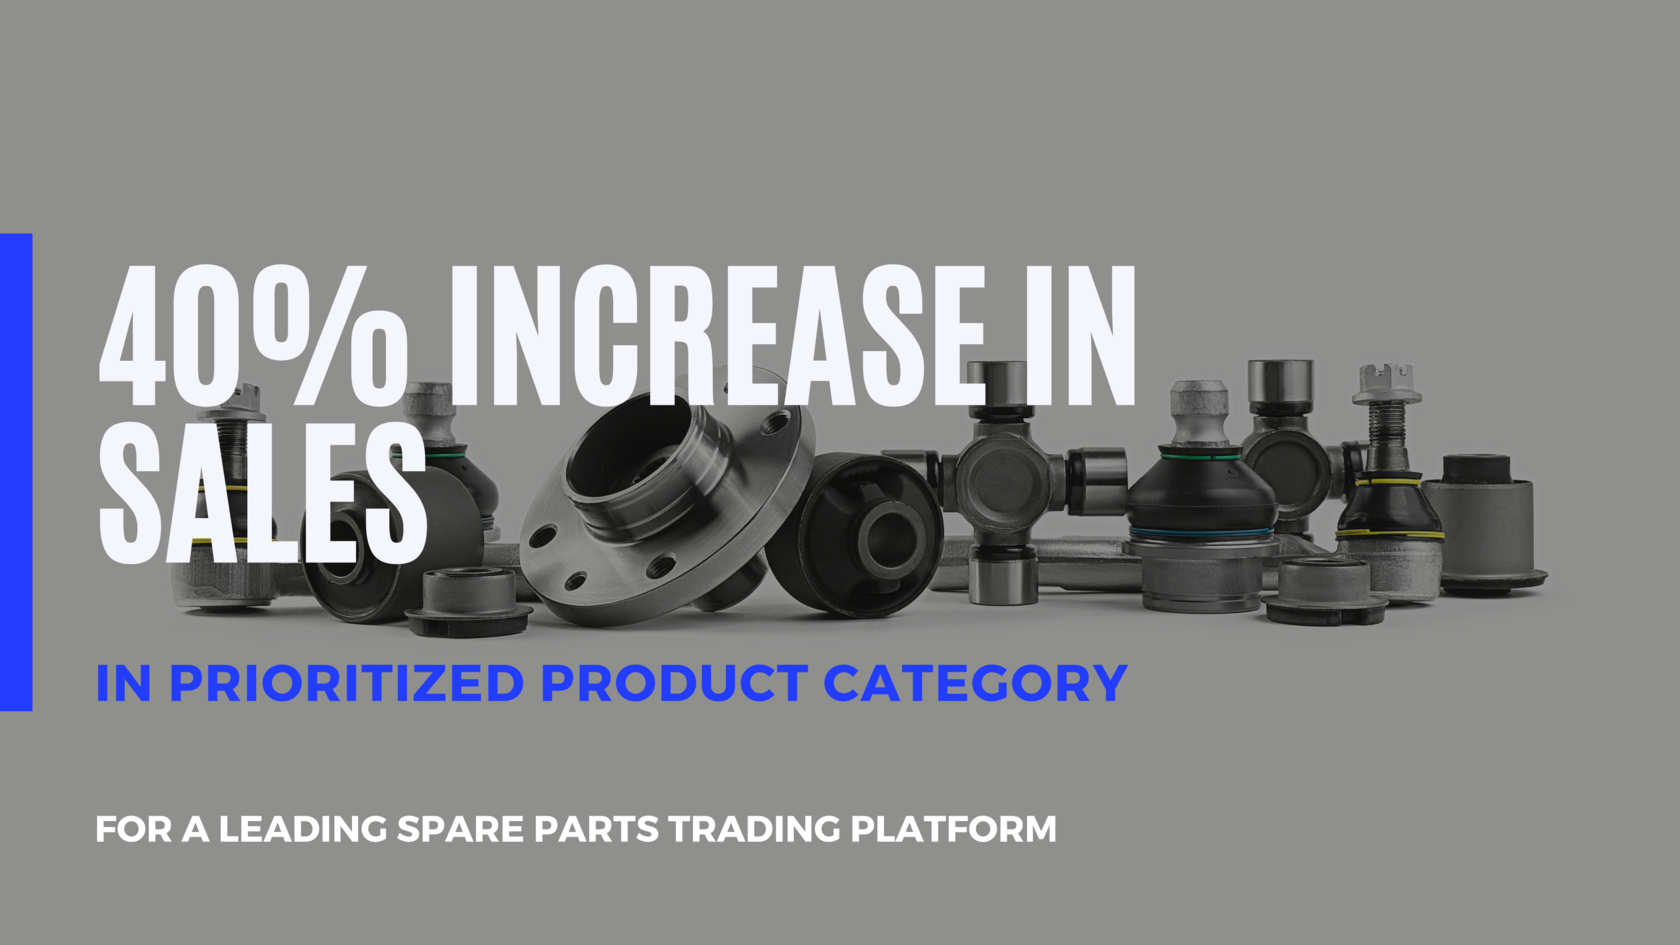 Accelerating revenue and EBITDA growth for a leading spare parts trading platform